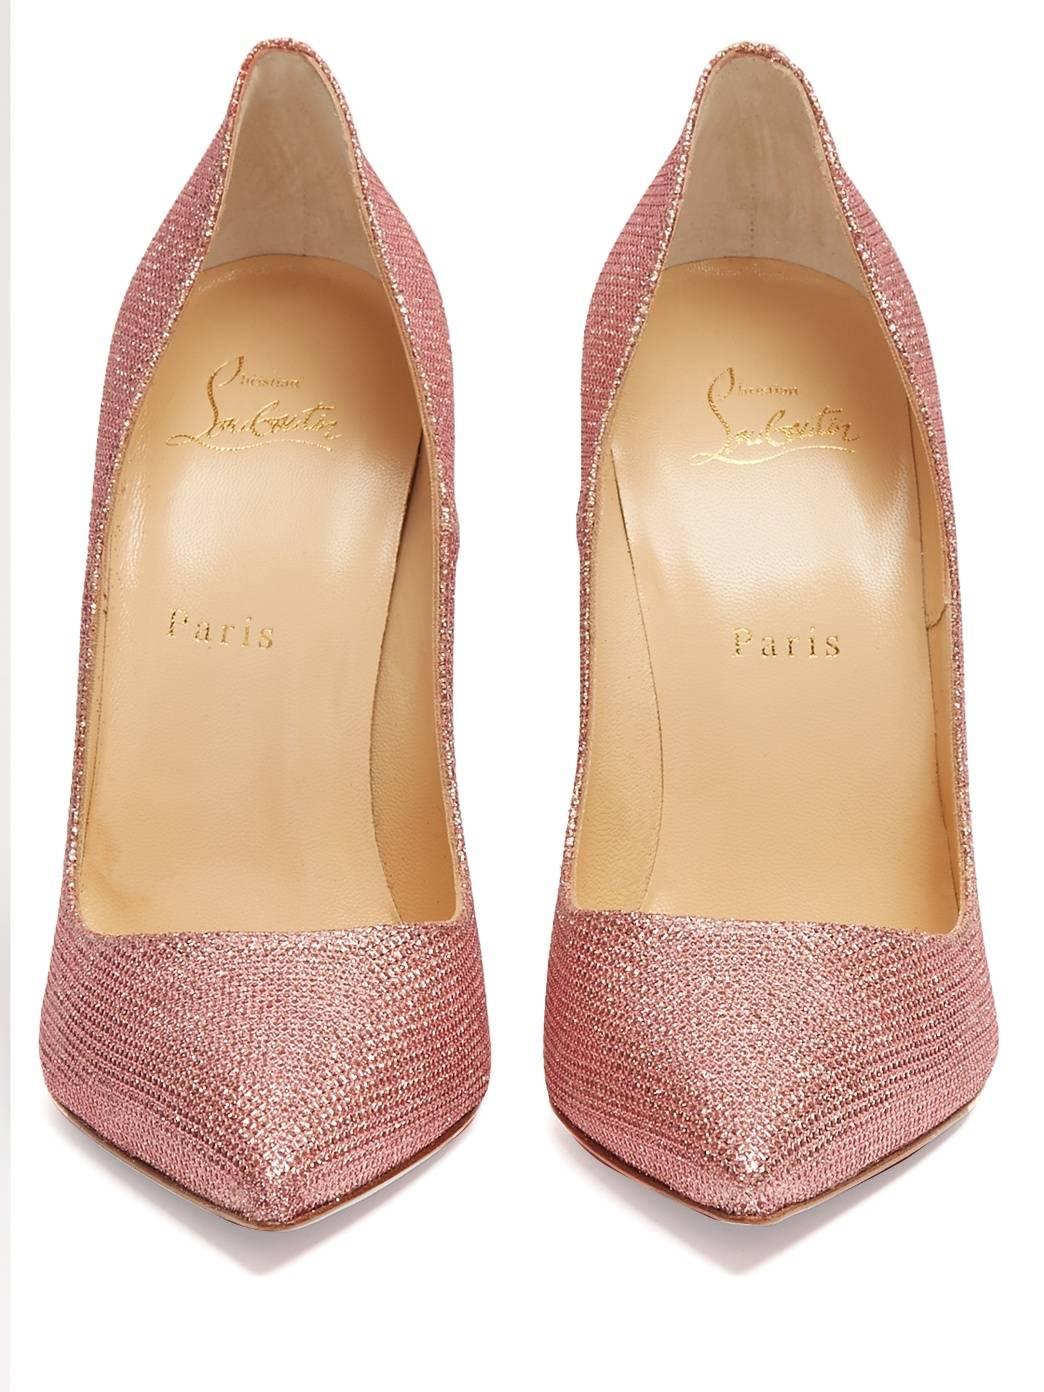 Beige Christian Louboutin New Pink Canvas So Kate Evening High Heels Pumps in Box